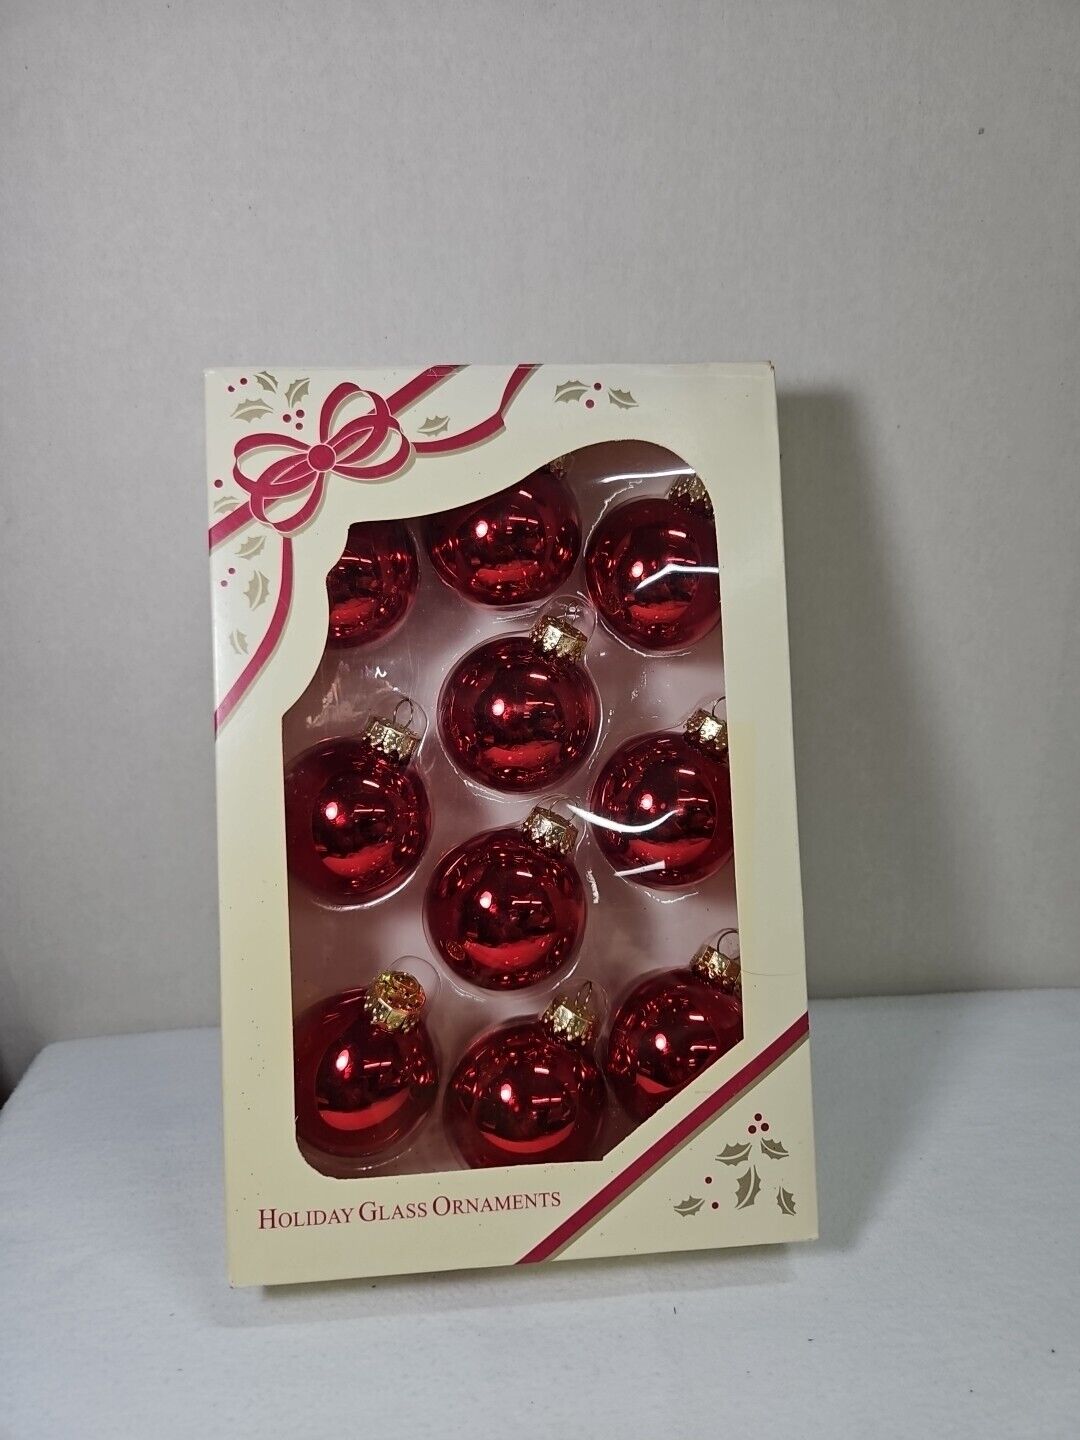 10 Bright RED Shiny GLASS ORNAMENTS. \